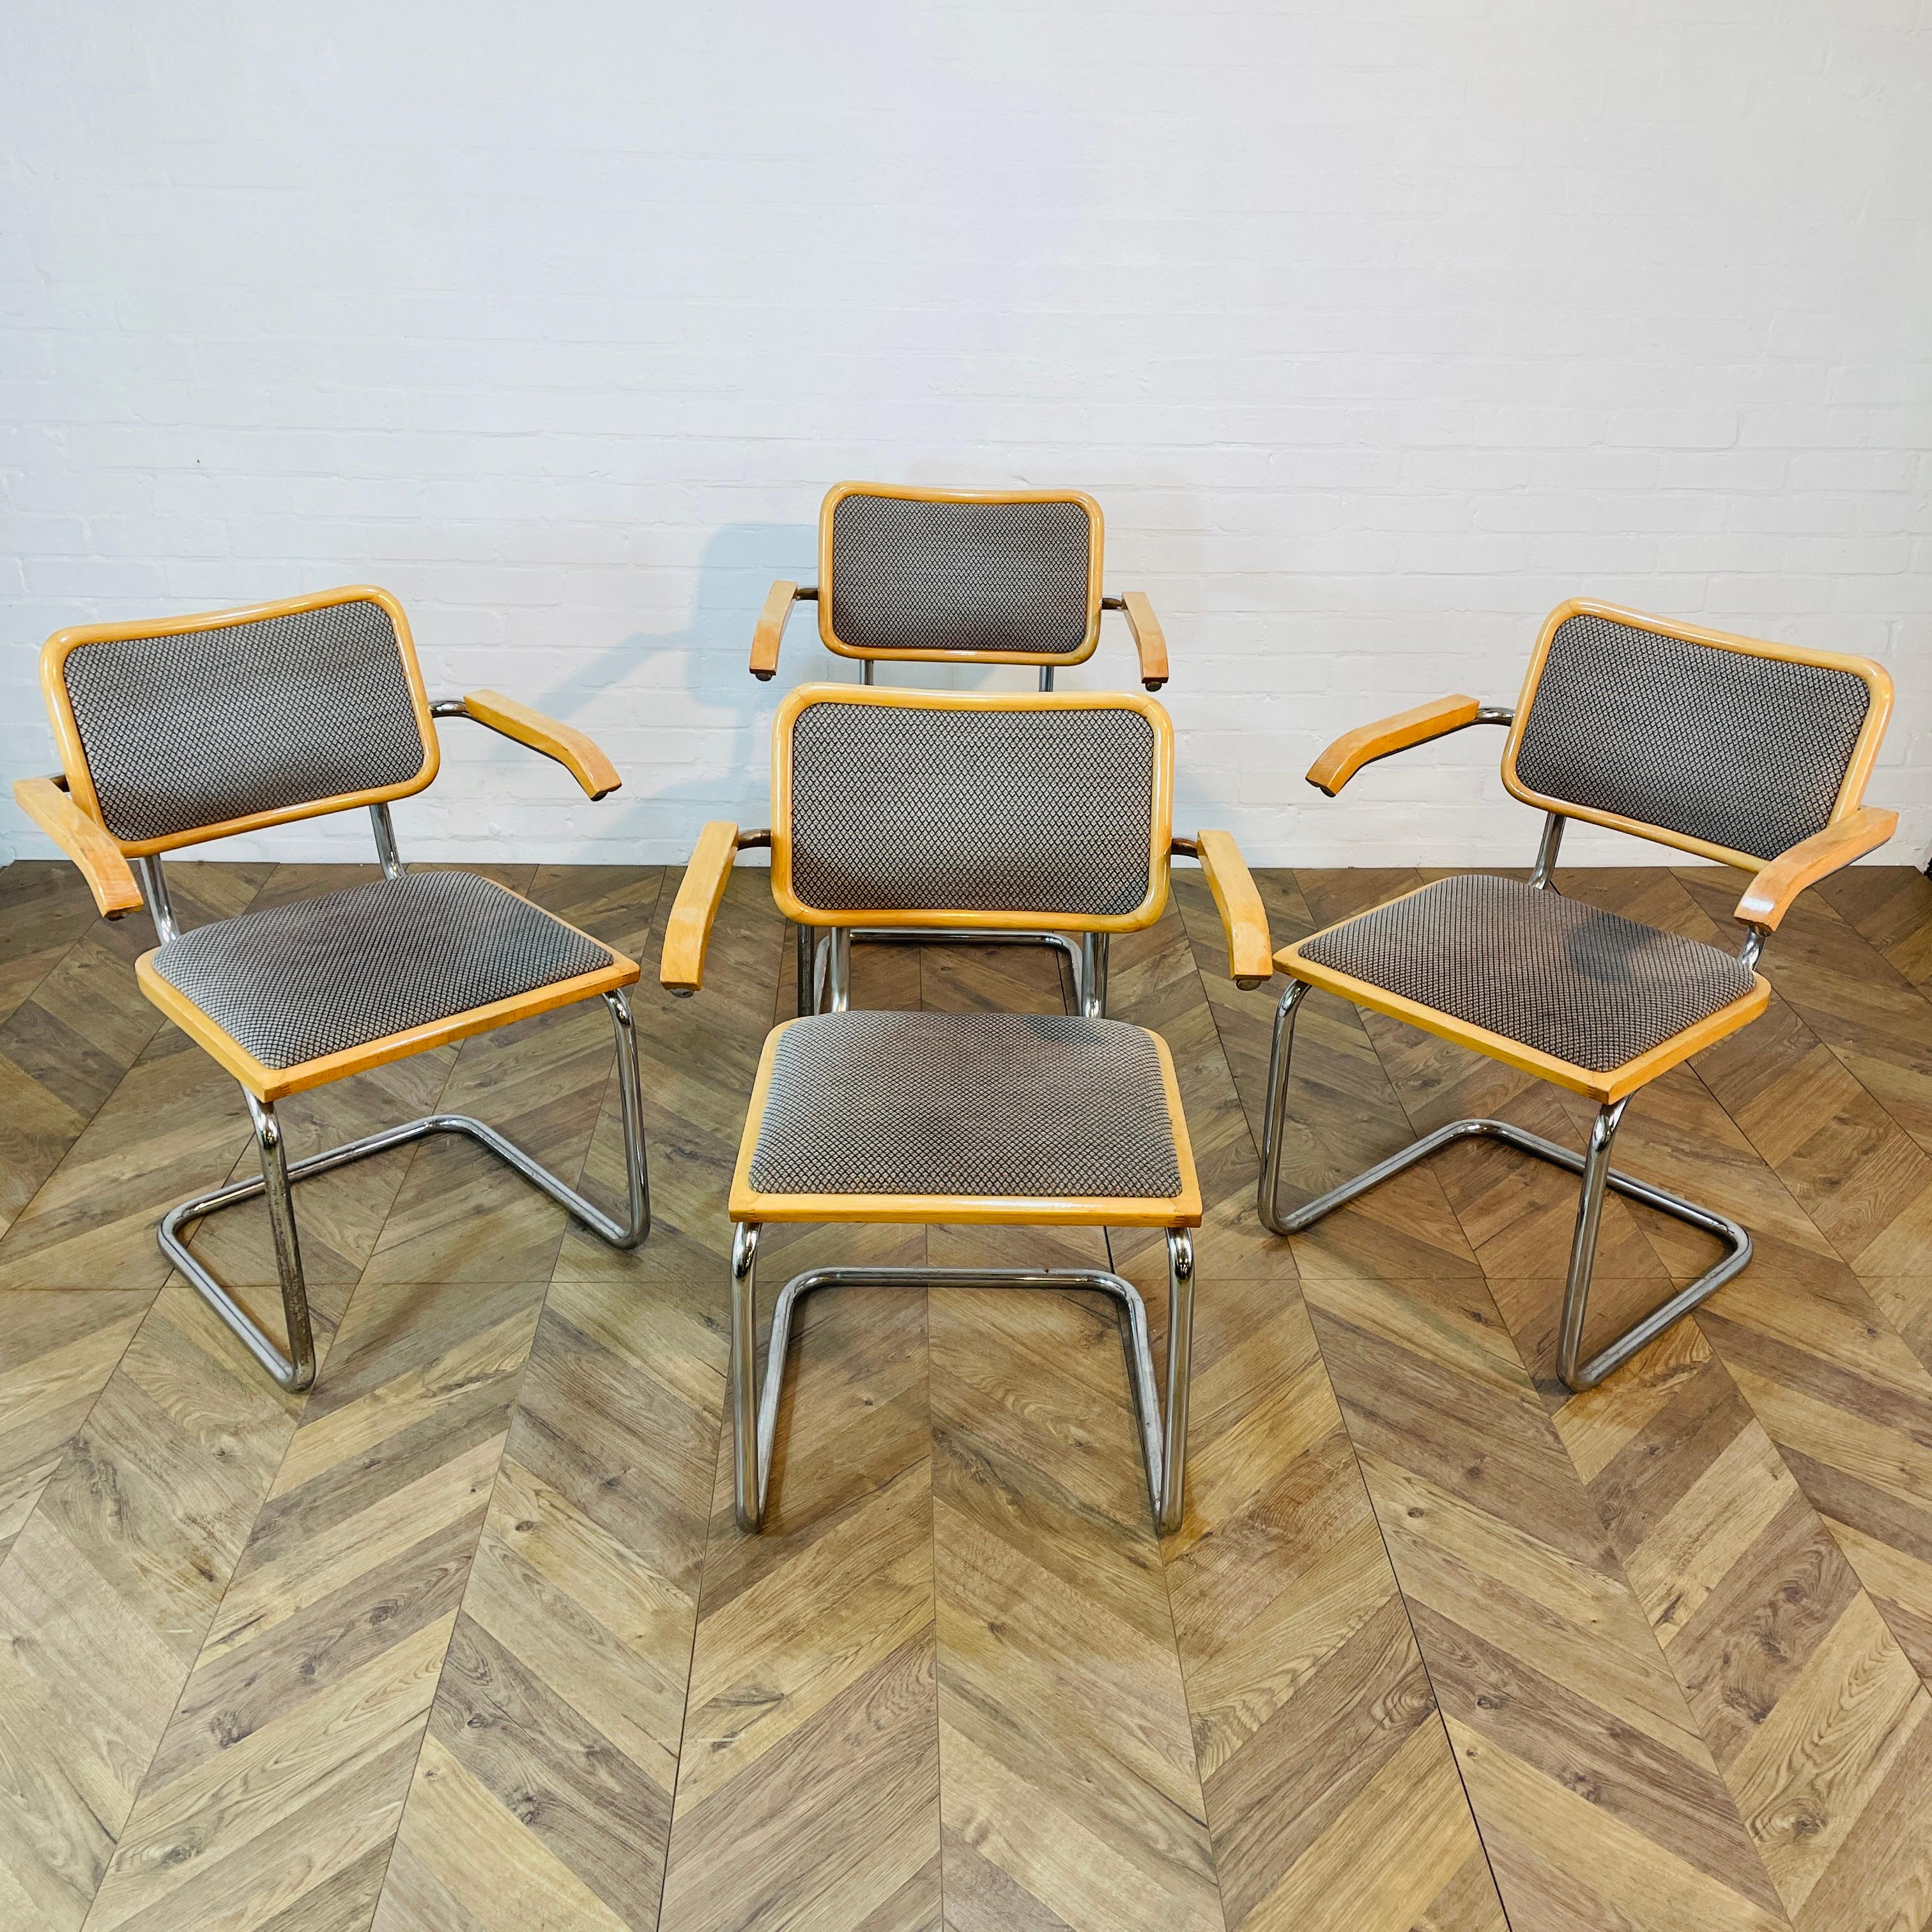 Vintage Glass Circular Dining Table + Set of 4 Marcel Breuer Cesca Armchairs In Good Condition For Sale In Ely, GB